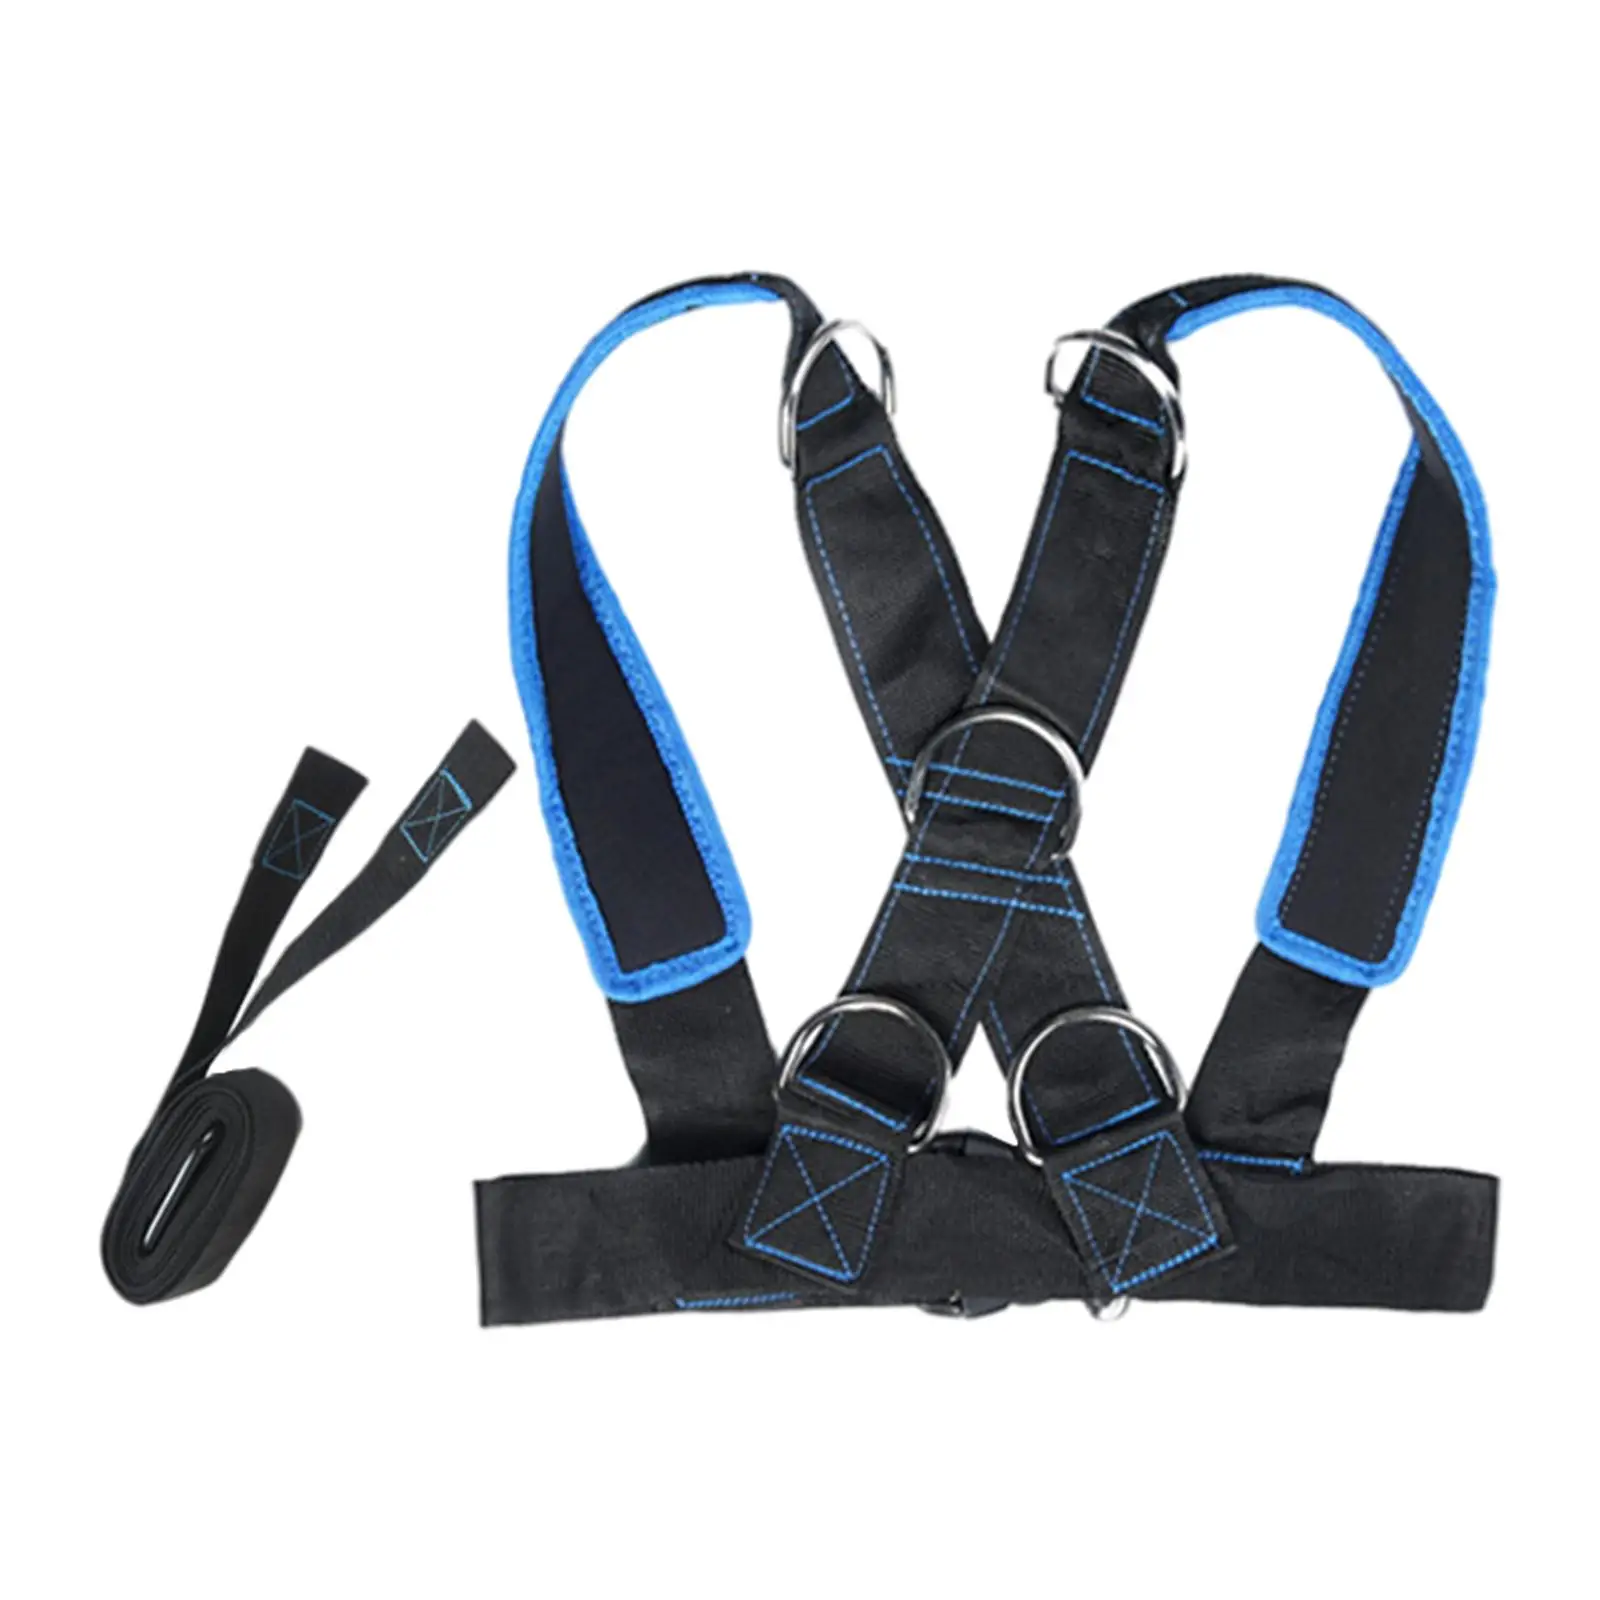 Weight Sled Resistance Belt ,with Pull Strap , Physical Training